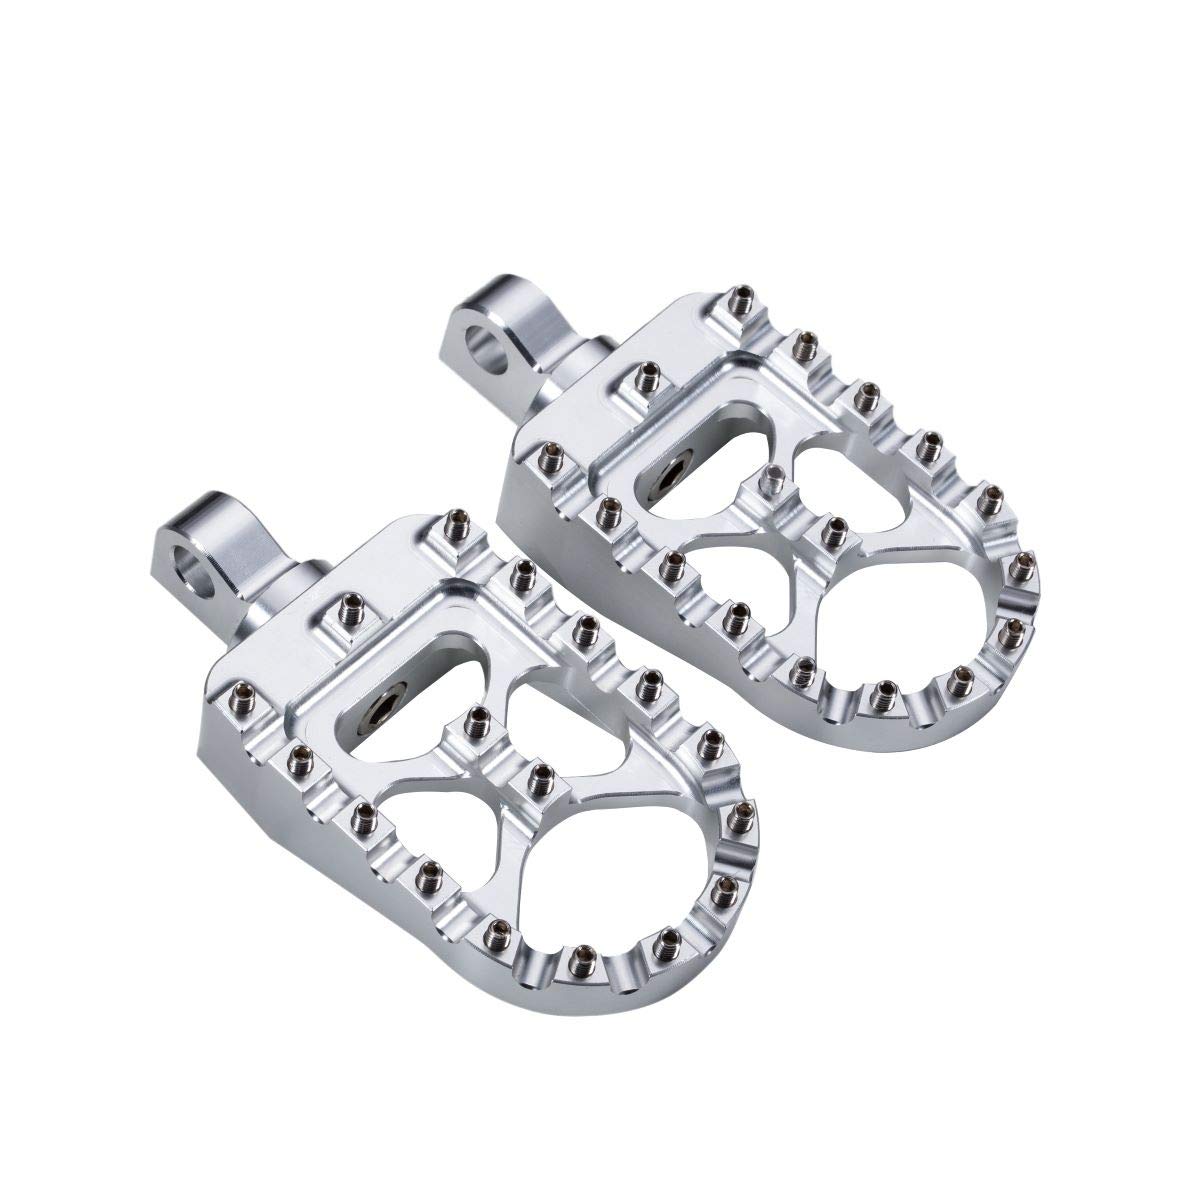 Hopider Cnc Wide Foot Pegs 360A Roating Mx Chopper Bobber Style For Harley Dyna Sportster Fatboy Iron 883,Silver